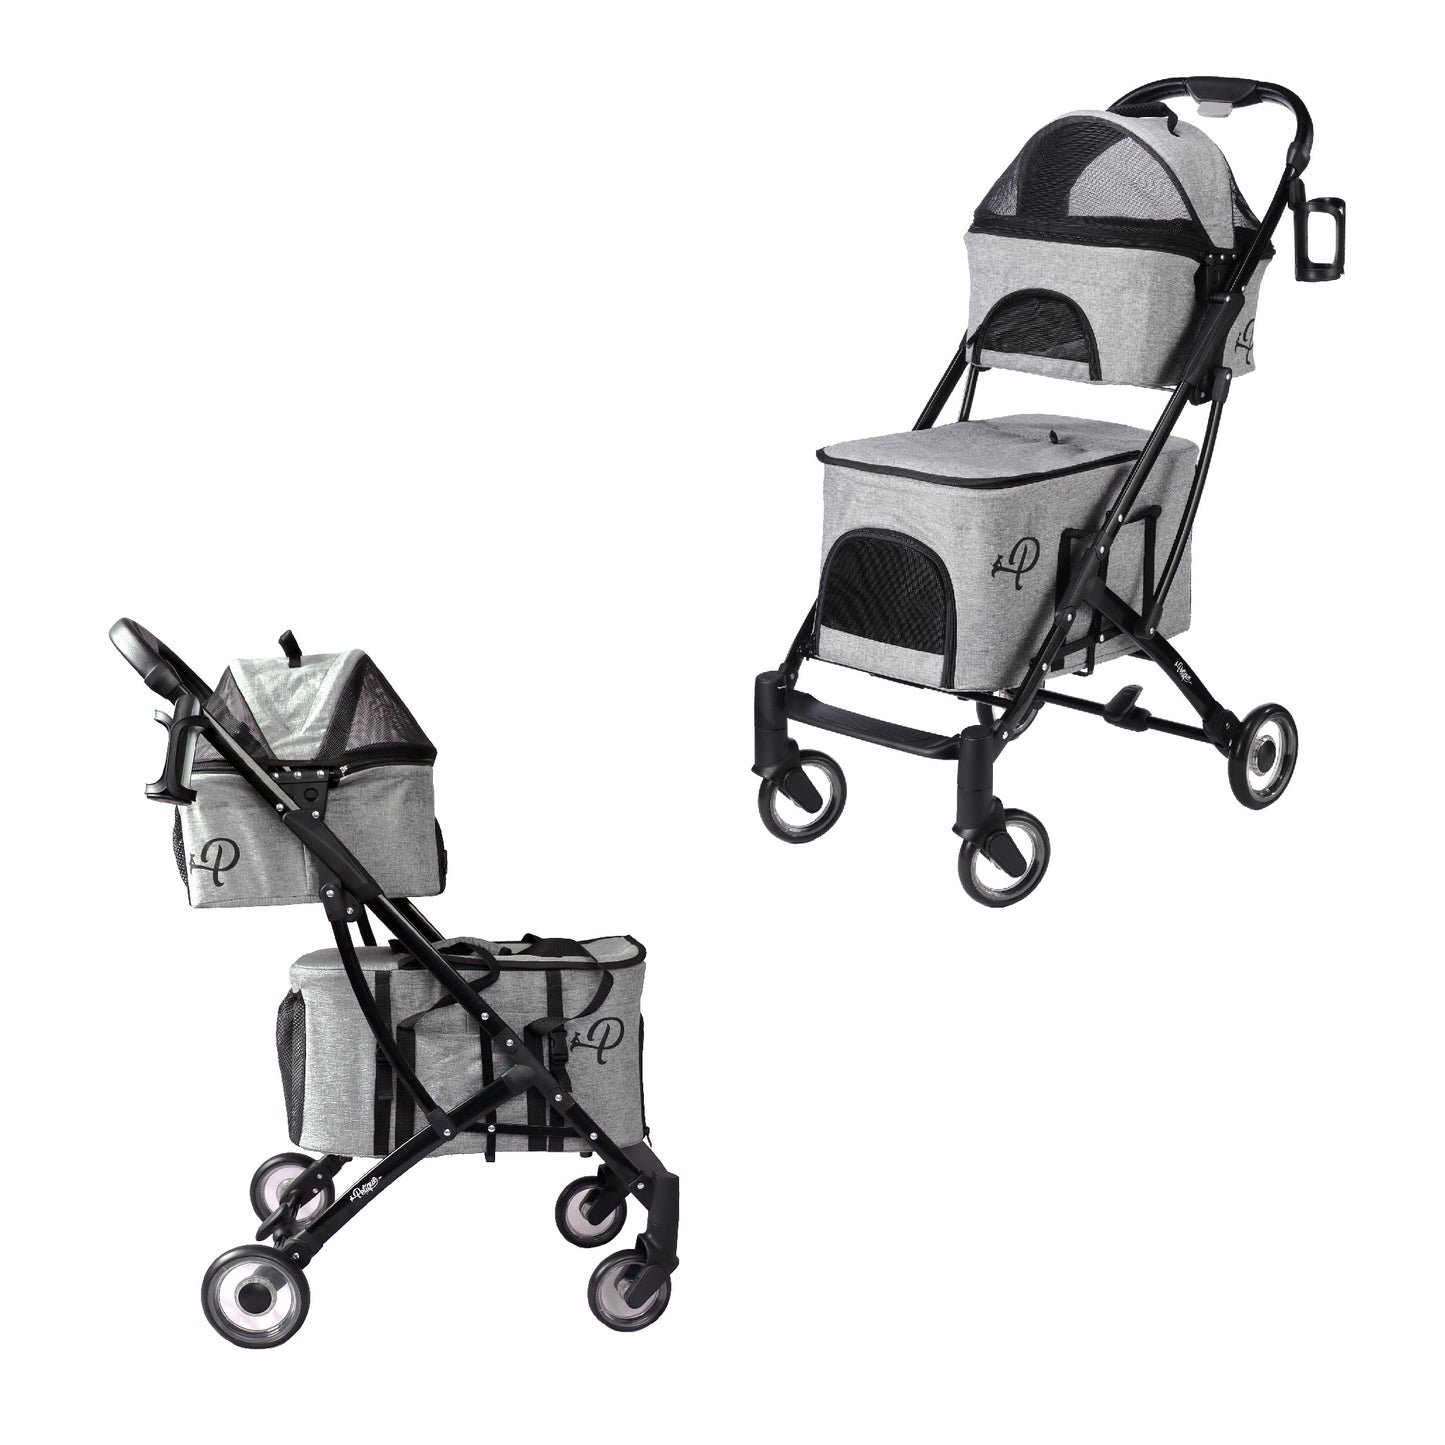 deluxe double decker pet stroller gray different angles